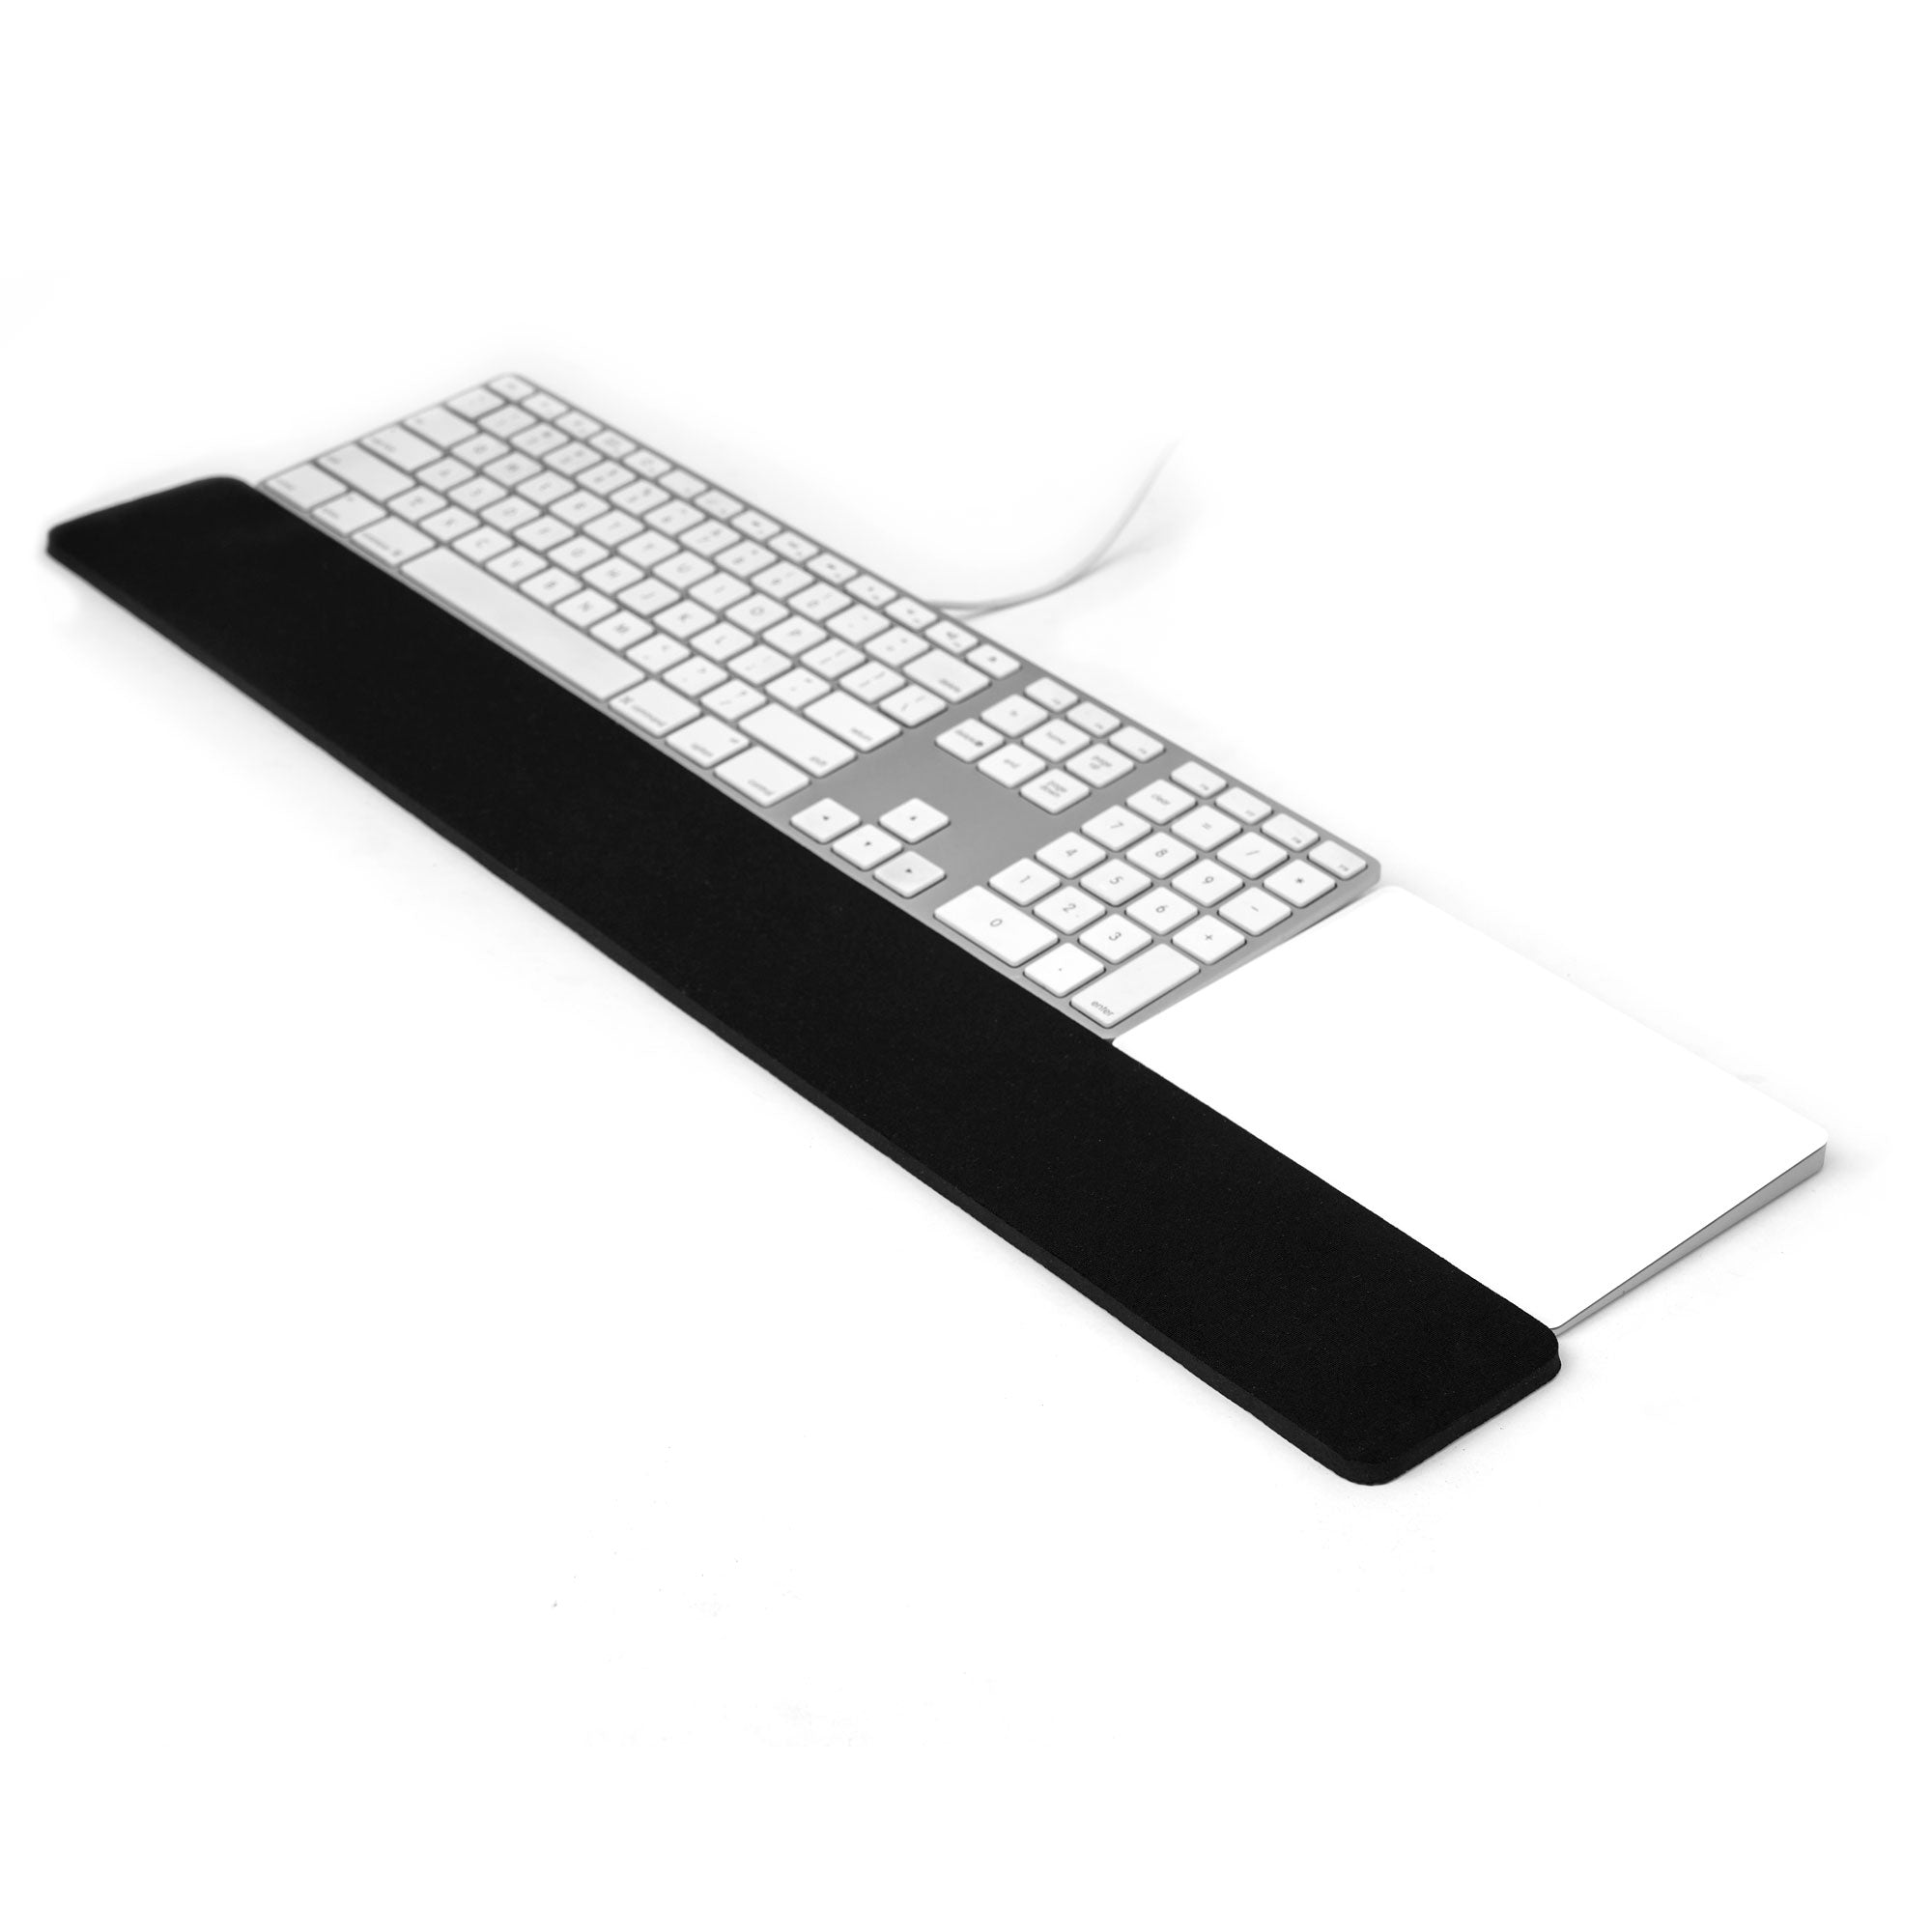 Grifiti Slim Wrist Pad 24 Inch for Thin Apple Wired Keyboard and Trackpad  or Mouse